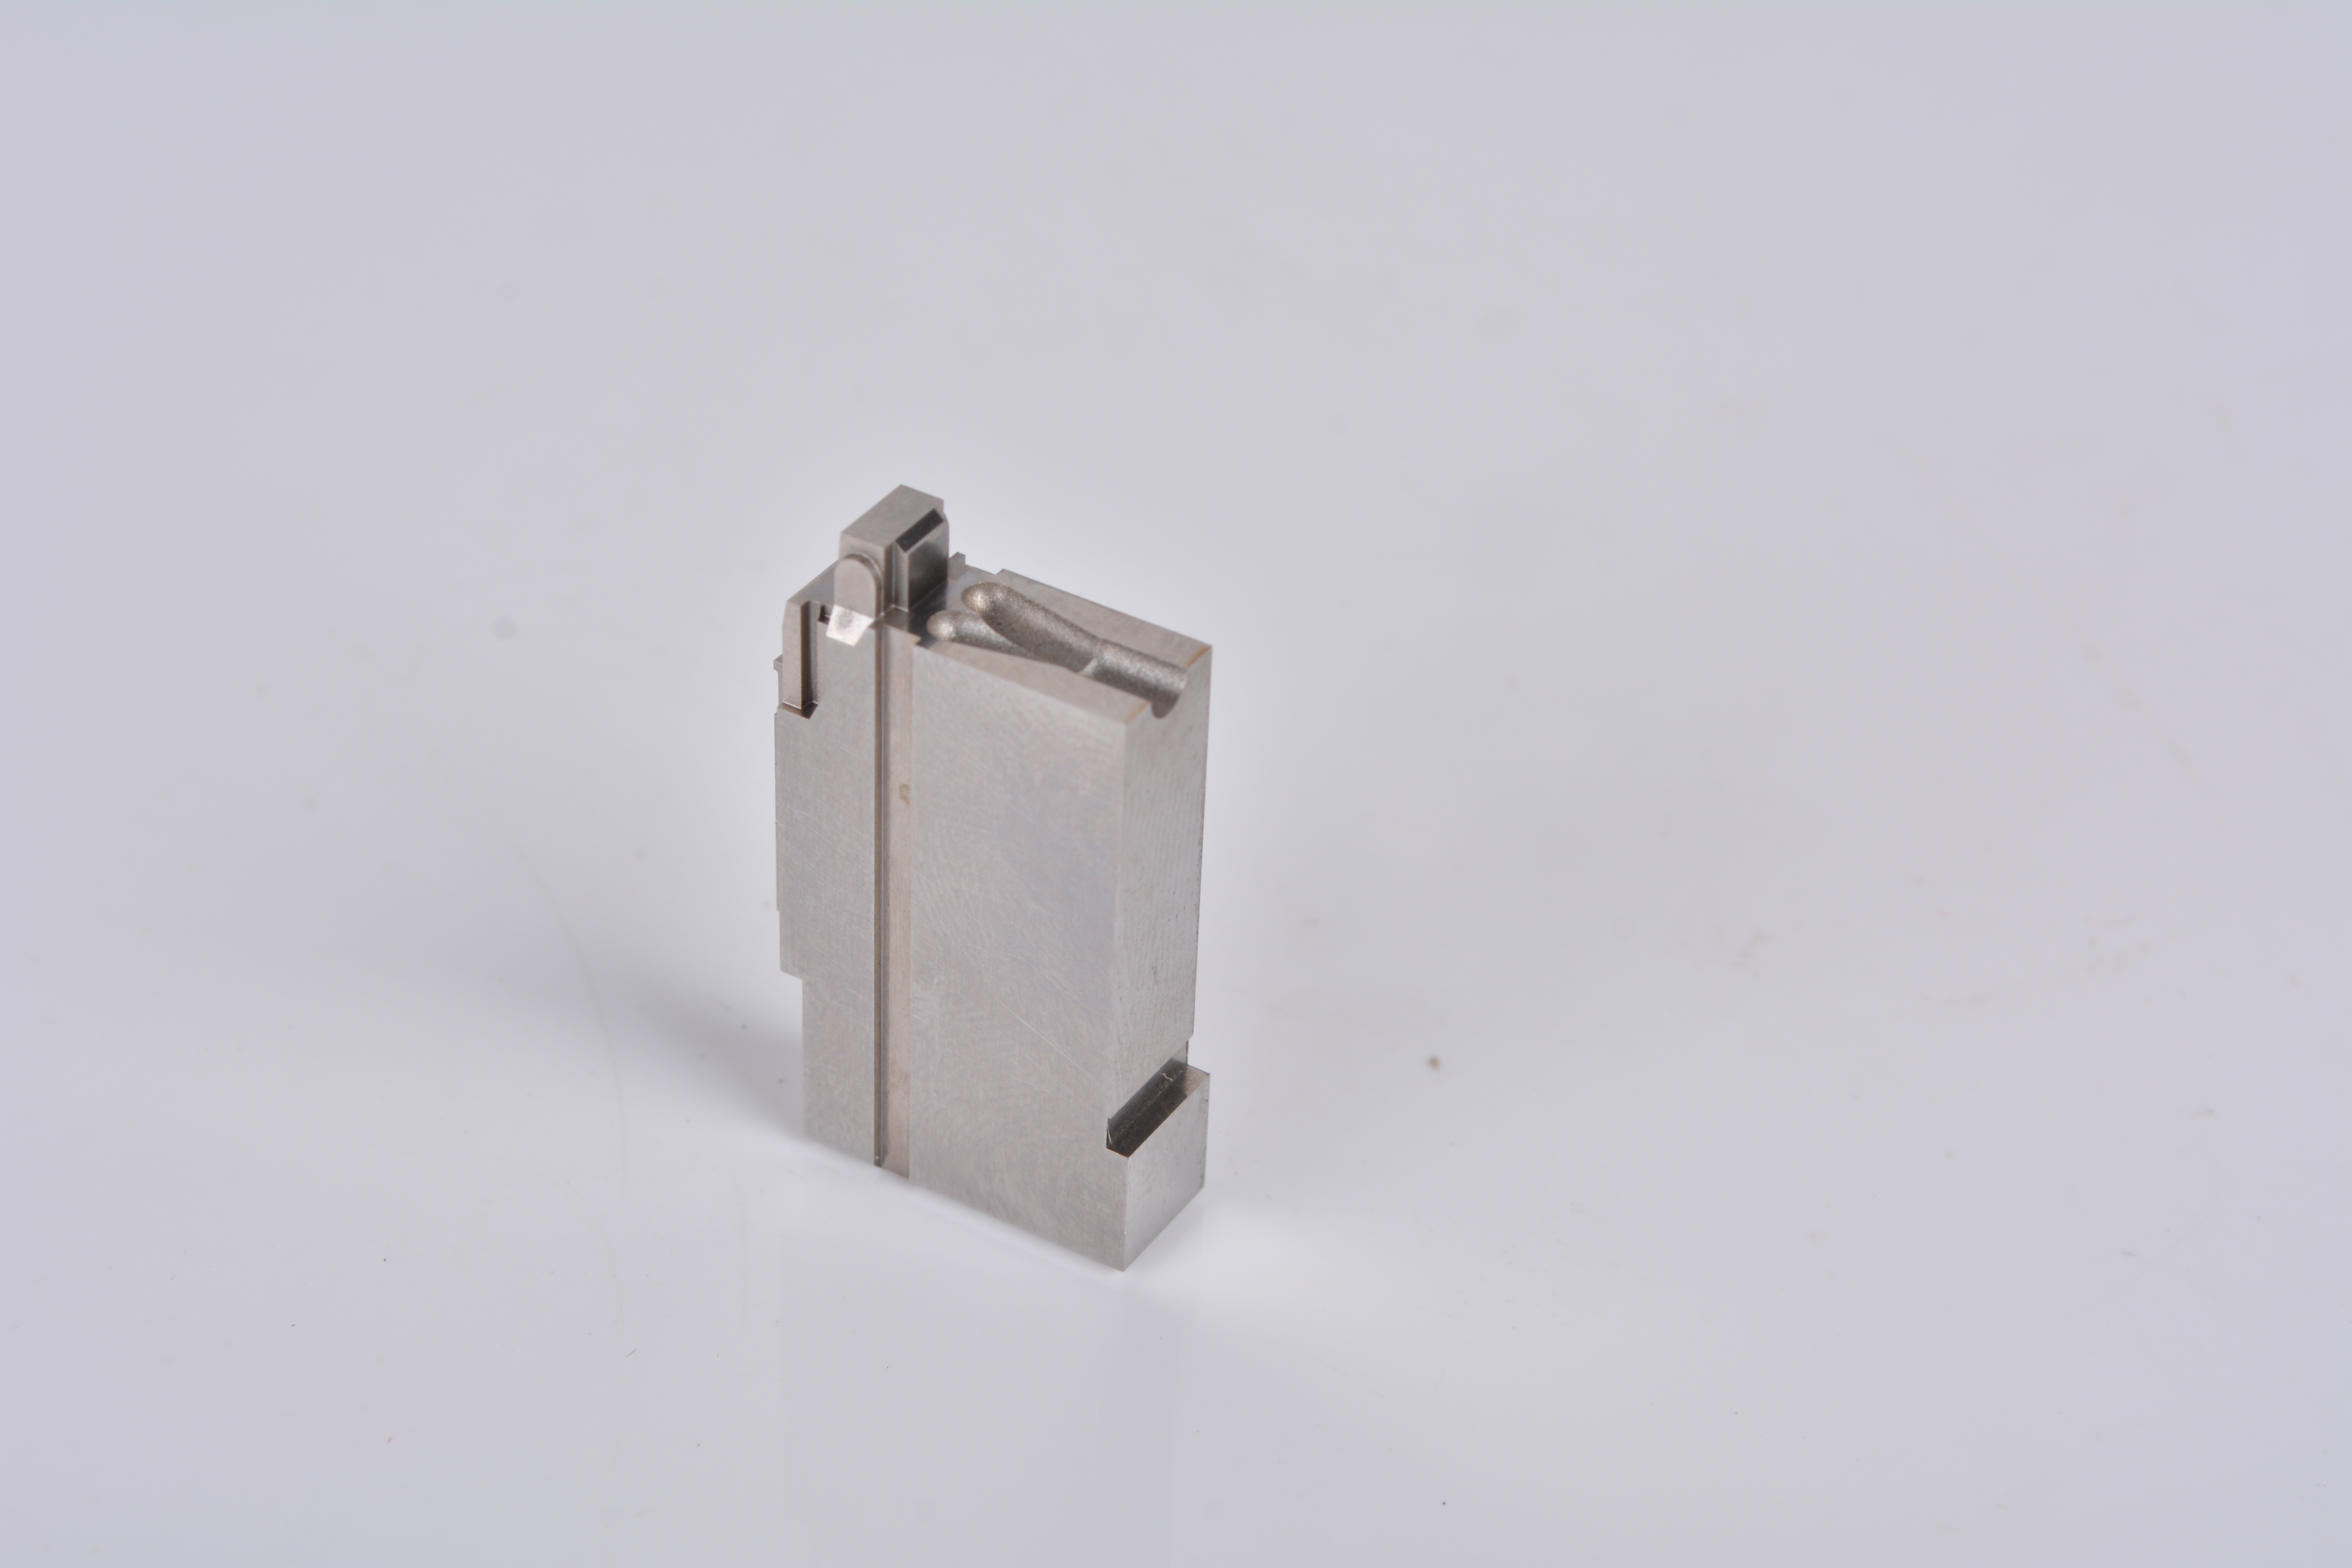 Computer Multiple P Connector Mold Parts Supplier –  Auto connector mold manufacturer precision plug-in injection plastic plastic mold – SENDY